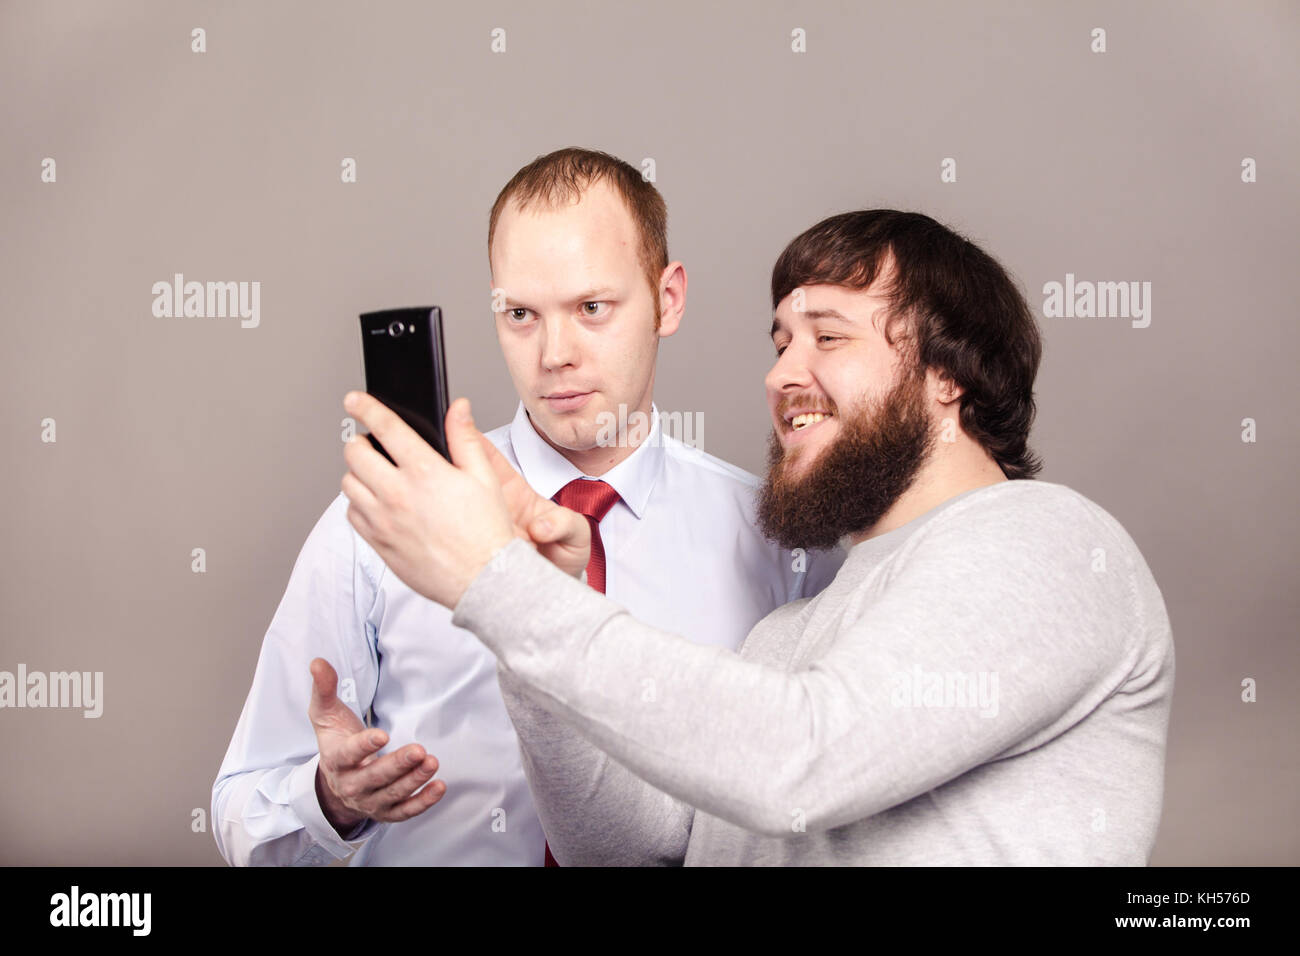 Two smiling colleagues taking the picture to them self, happy friends taking selfie with telephone camera on dark background Stock Photo